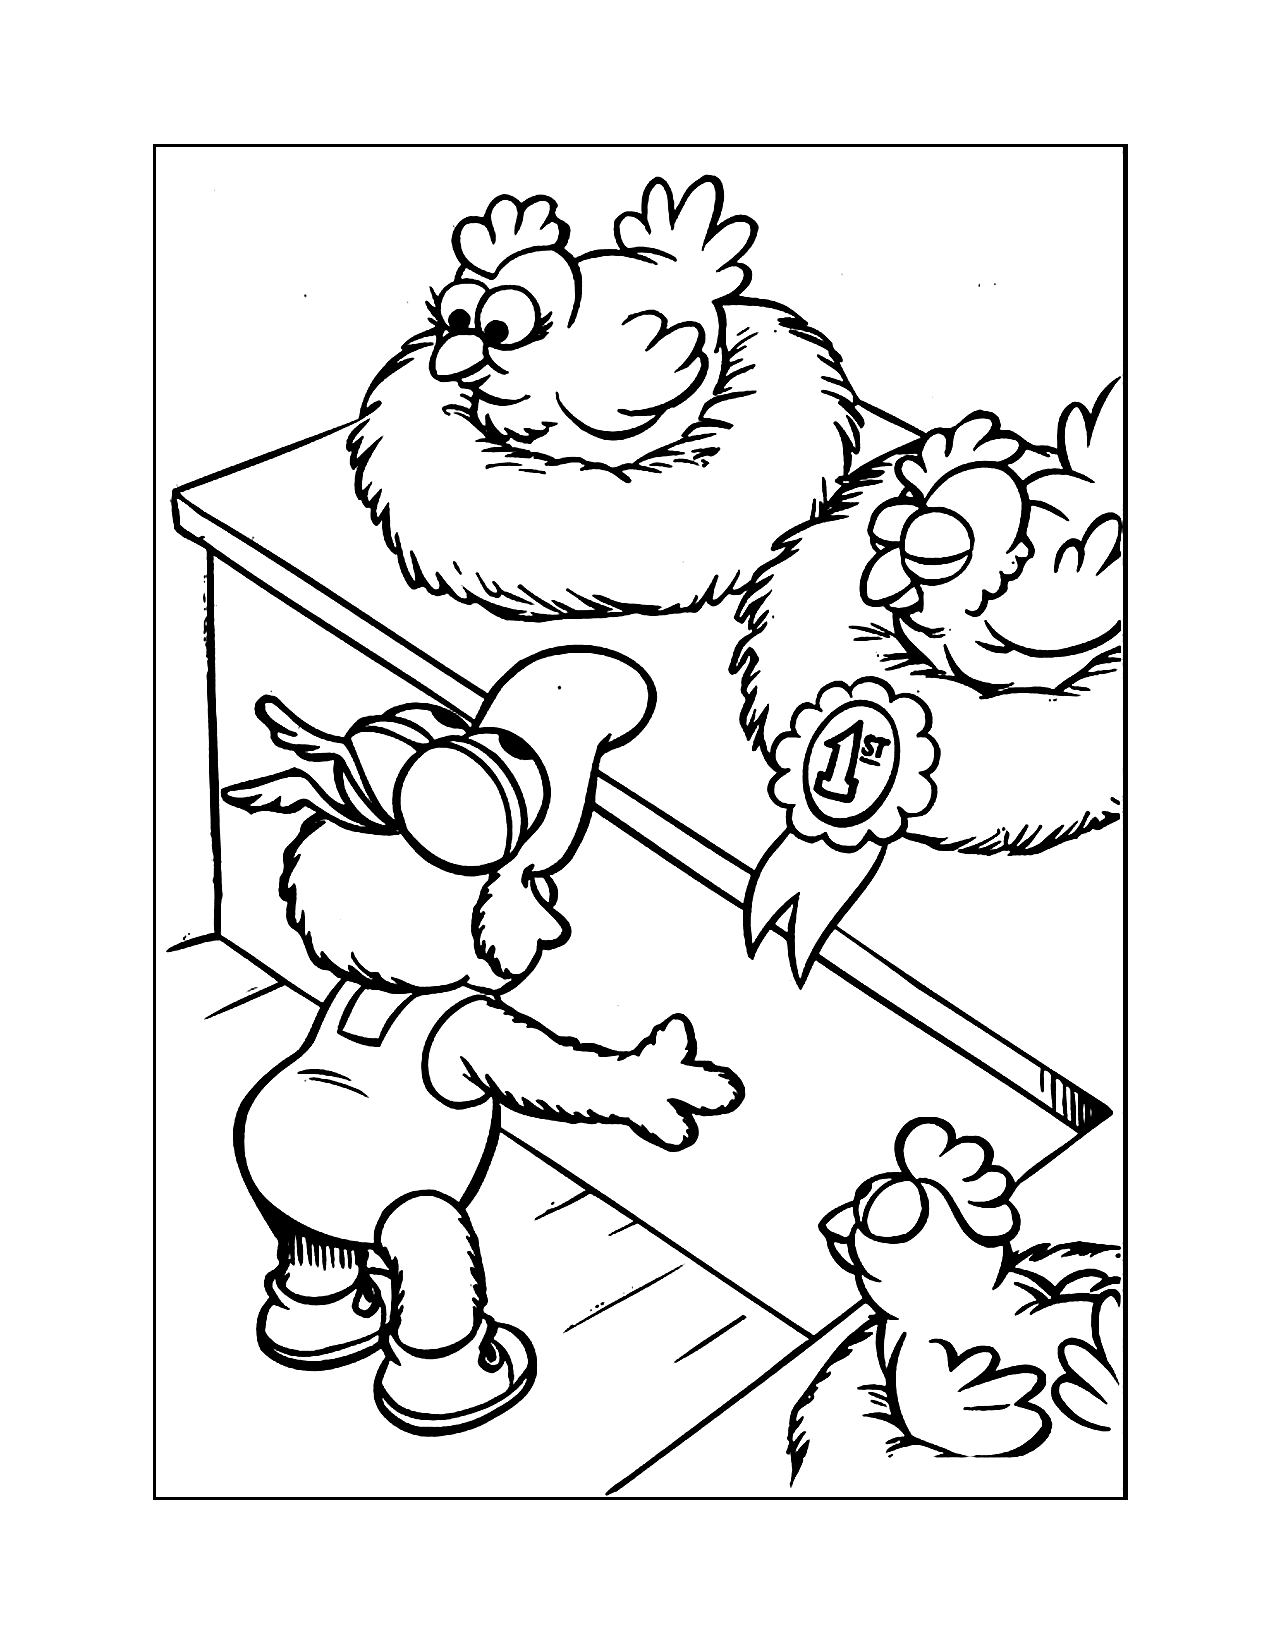 Baby Gonzo Finding Chickens Coloring Page